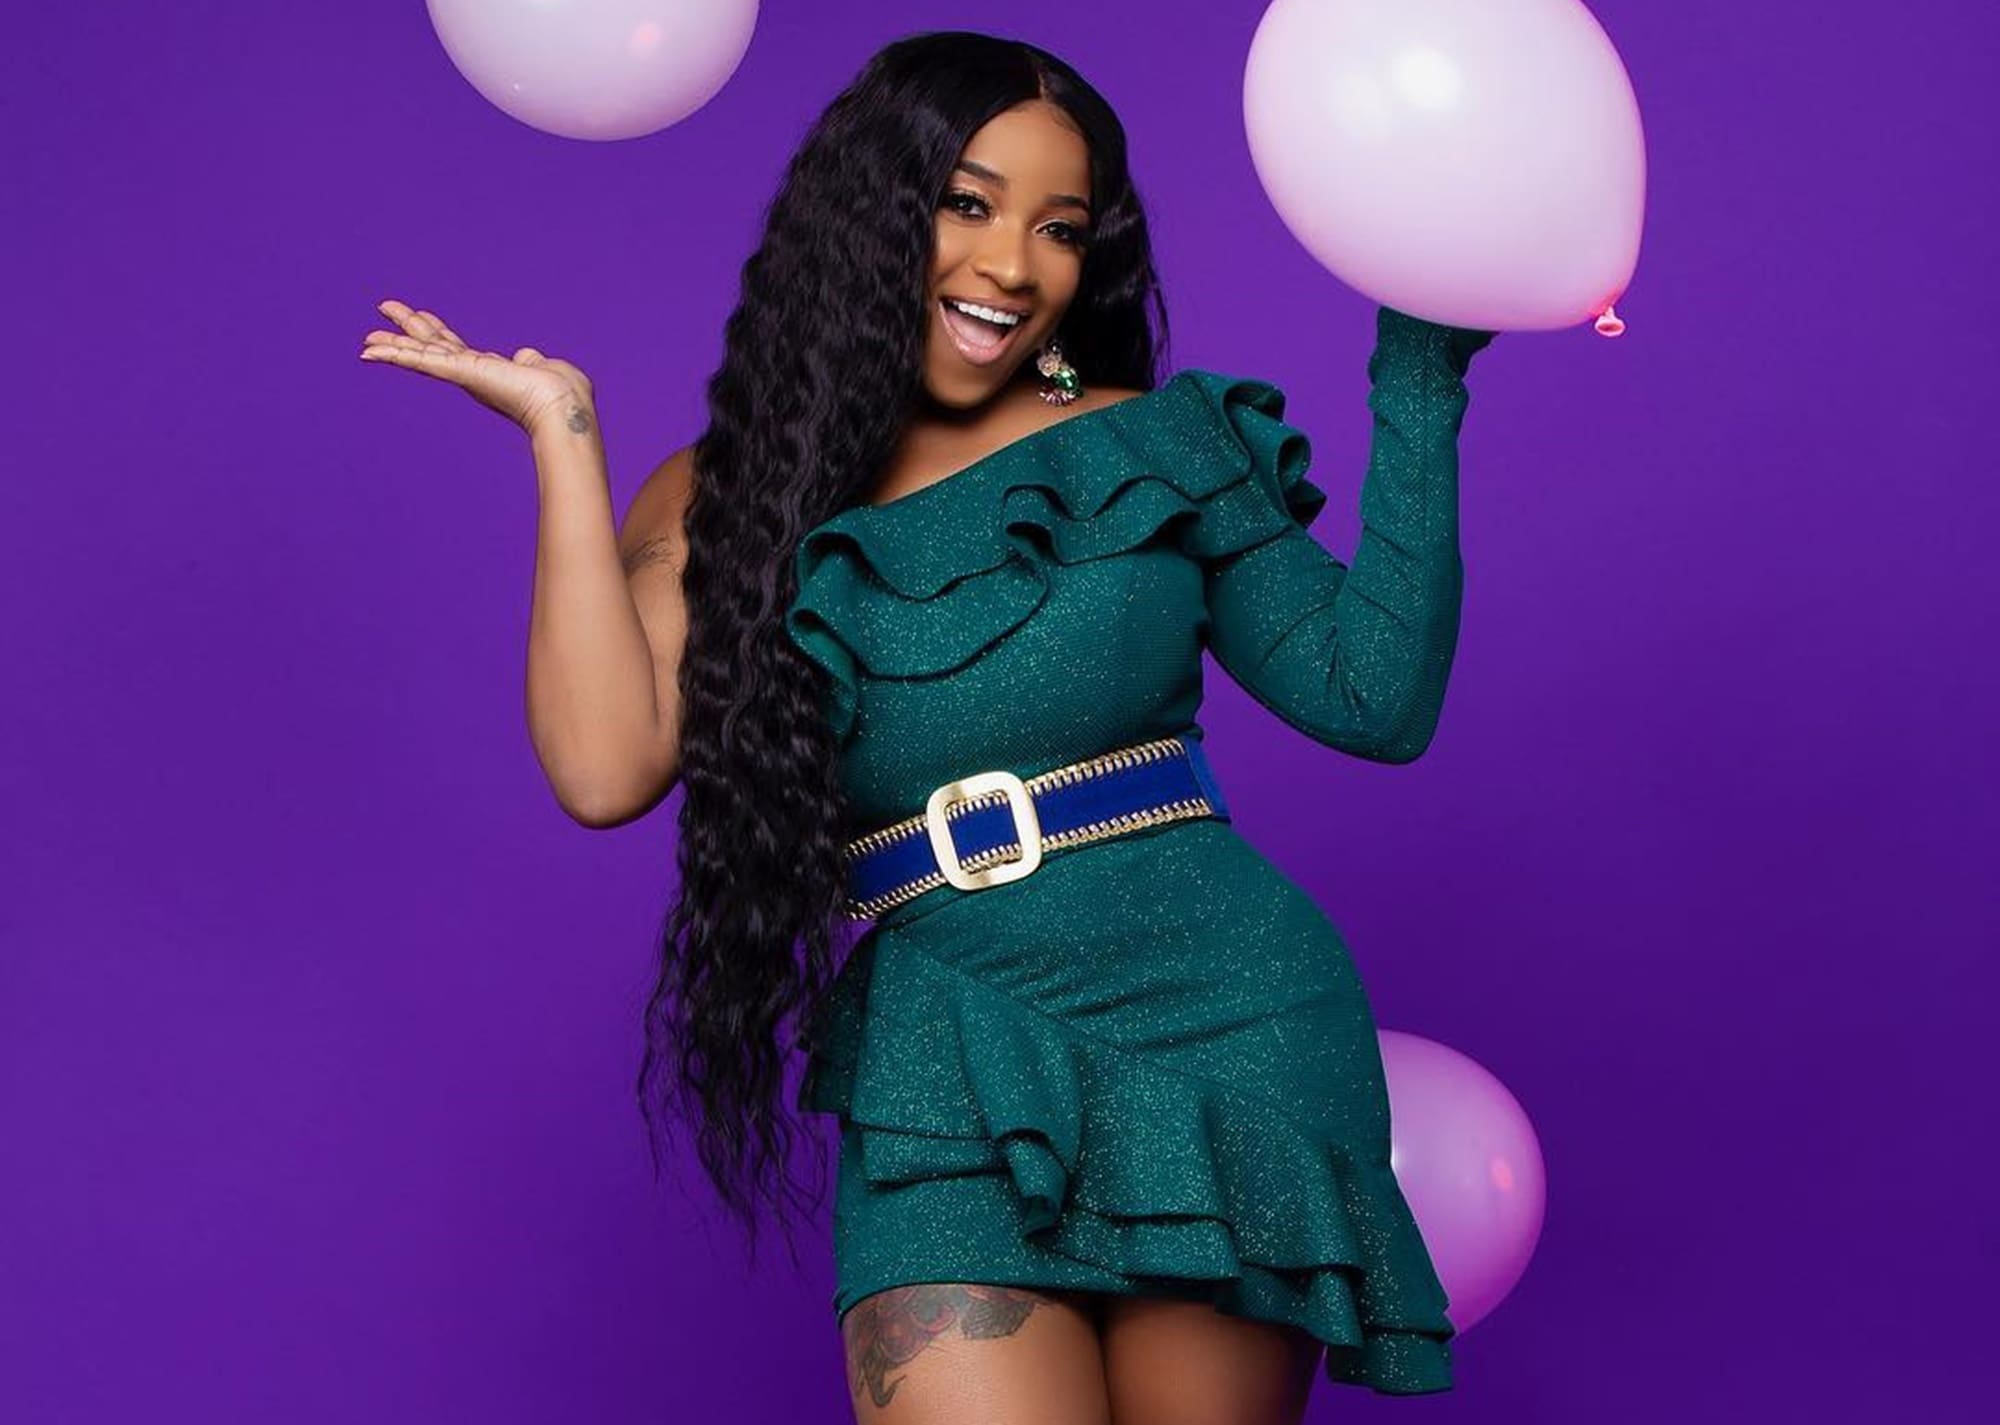 Toya Wright's Family Came In Town To Visit Her For Christmas - See Her Gorgeous Holiday Photo